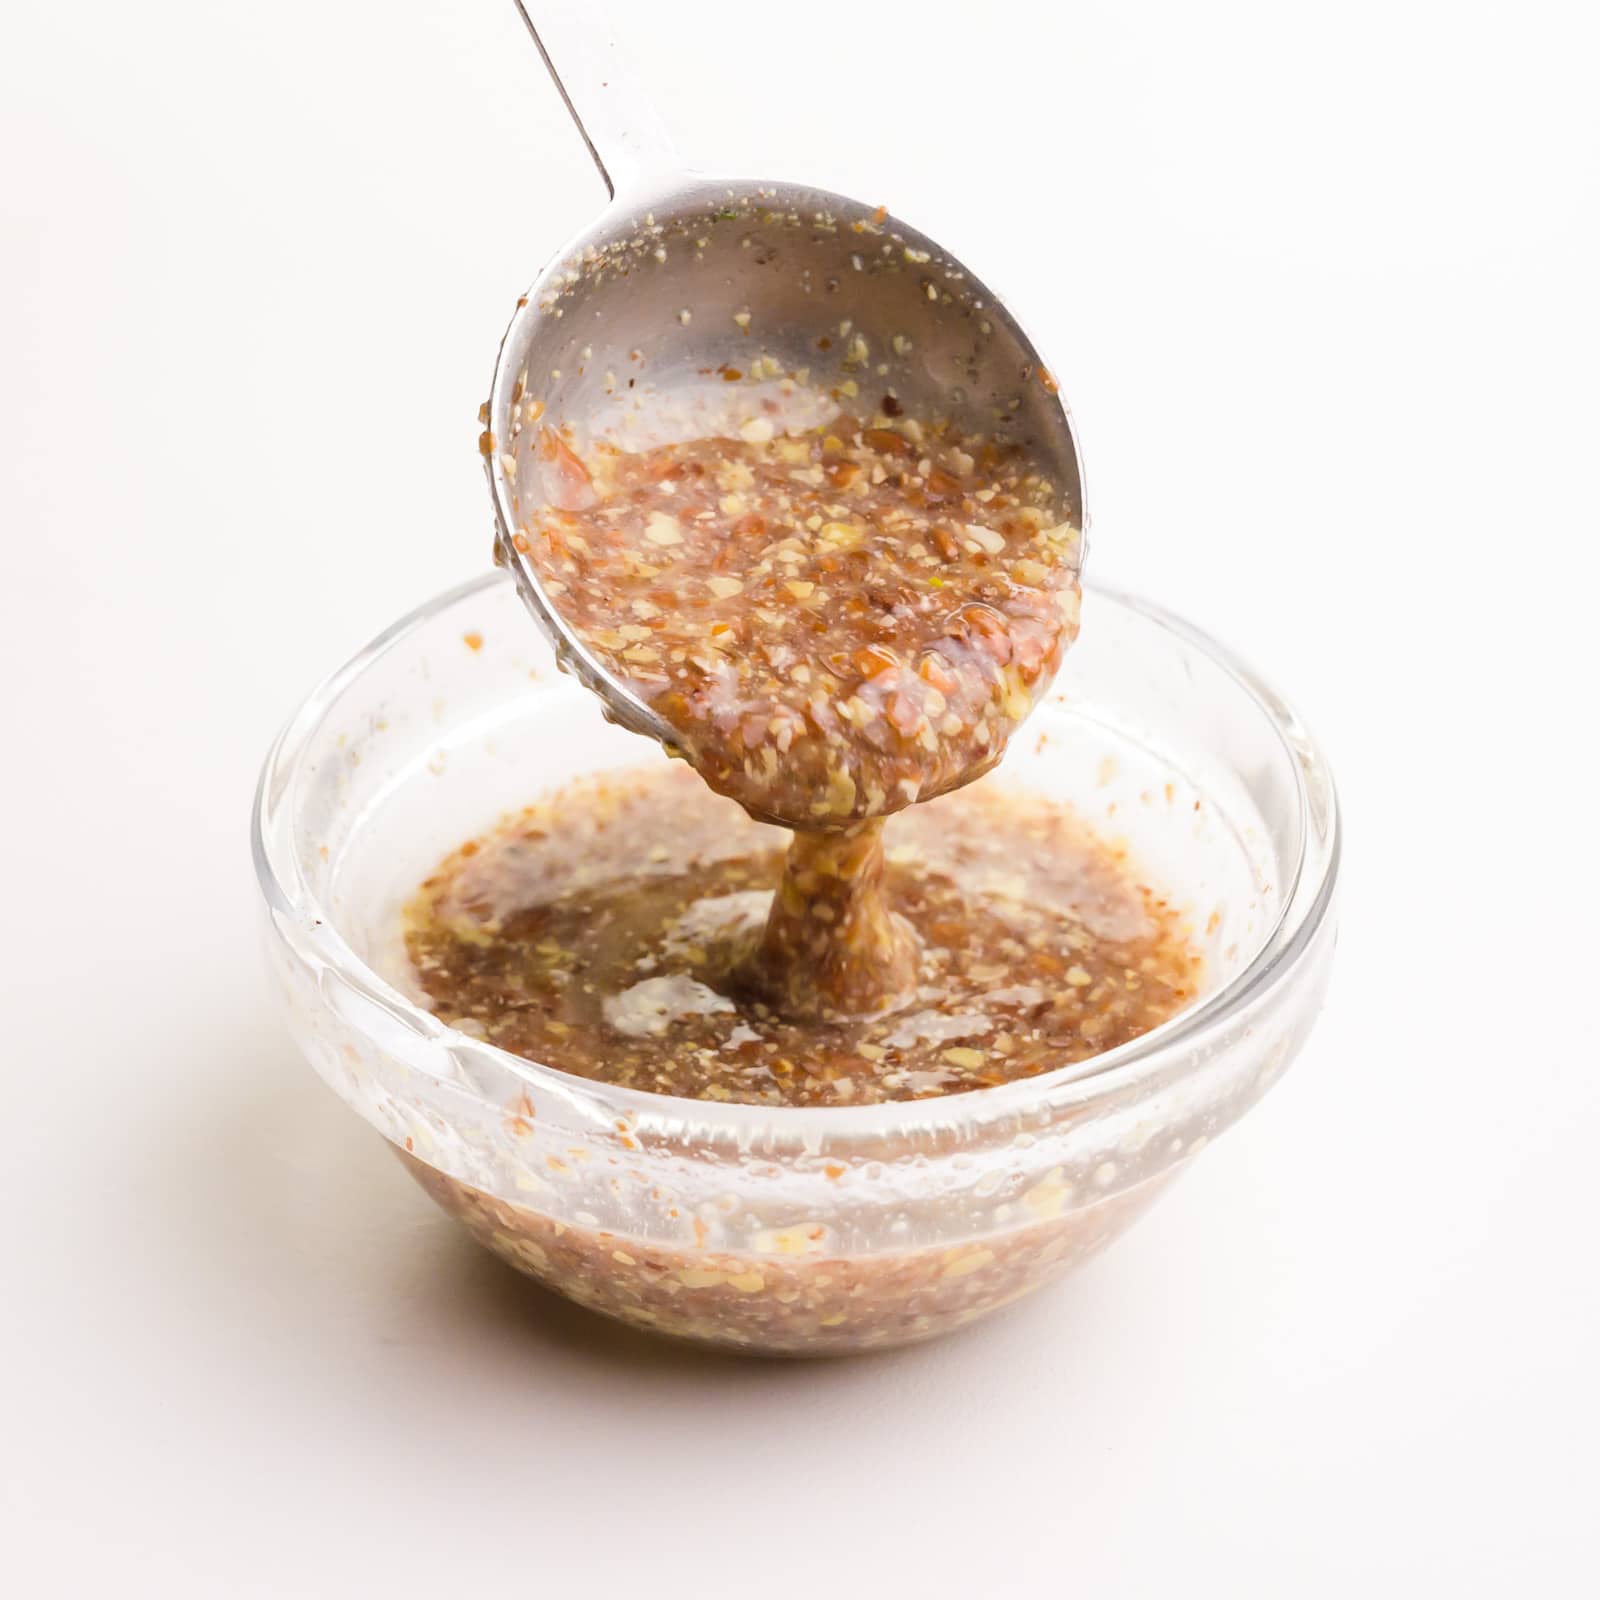 A measuring spoon drizzles a flax egg mixture into a small glass bowl